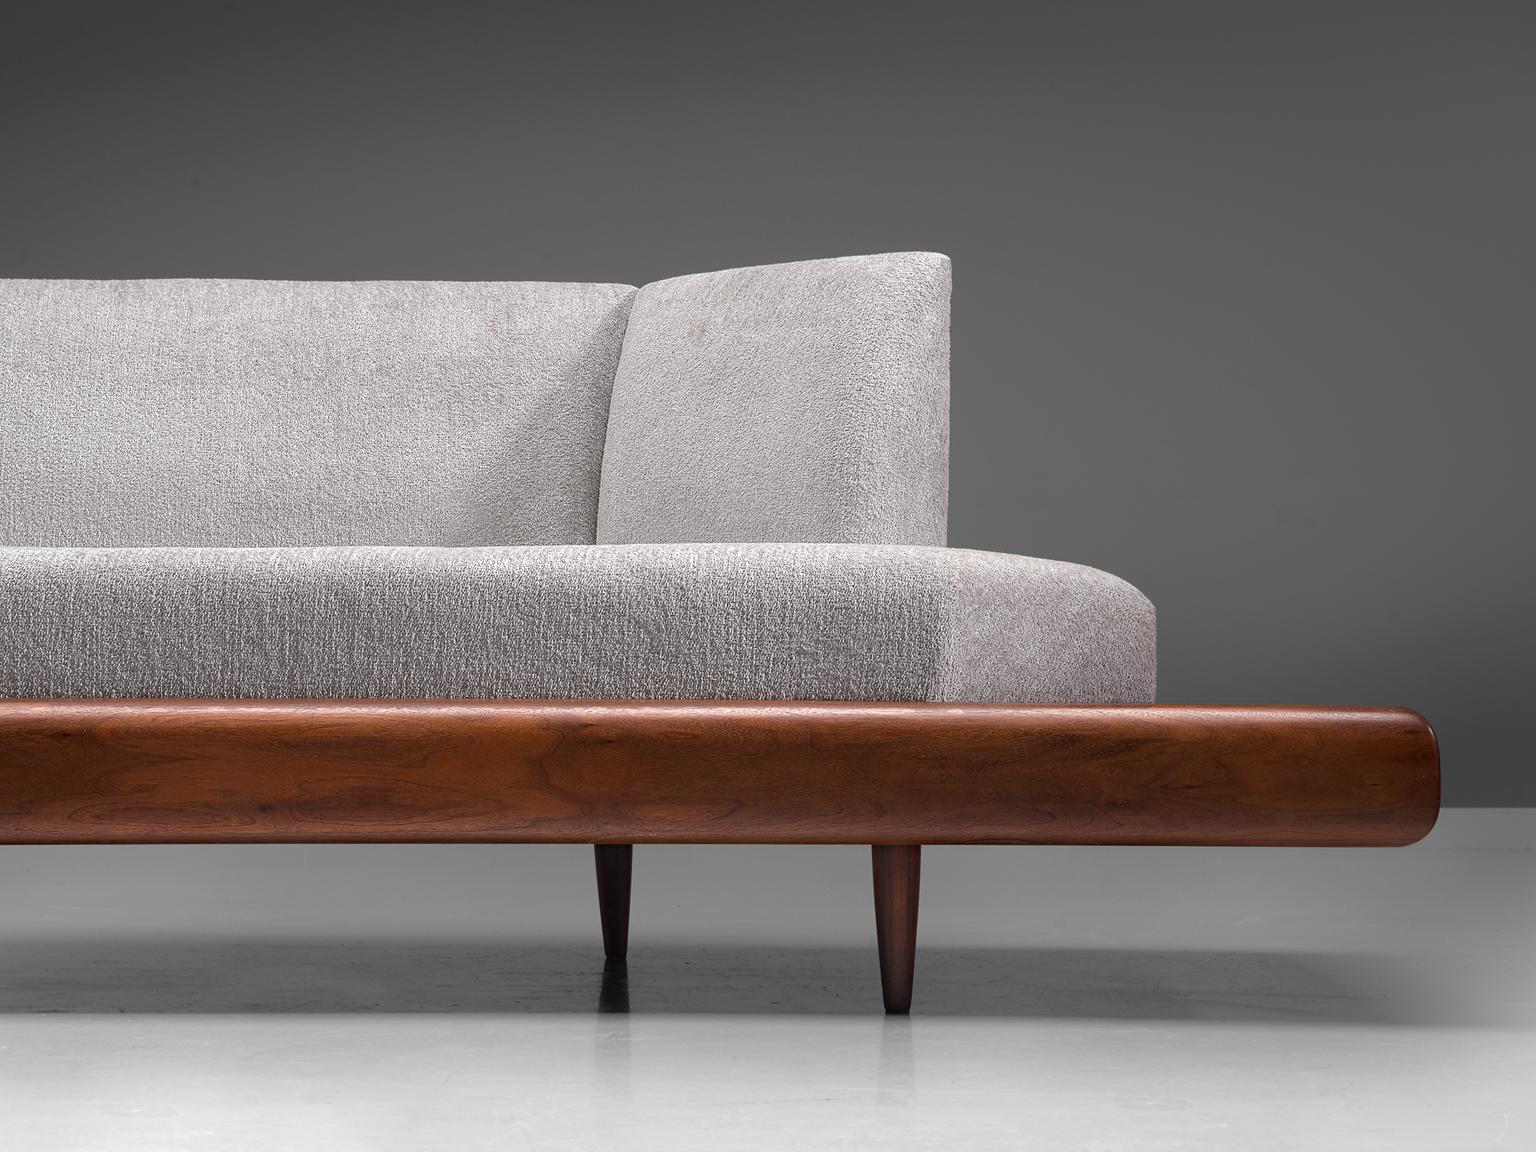 Mid-20th Century Adrian Pearsall 'Platform' Sofa Reupholstered in Pierre Frey Fabric